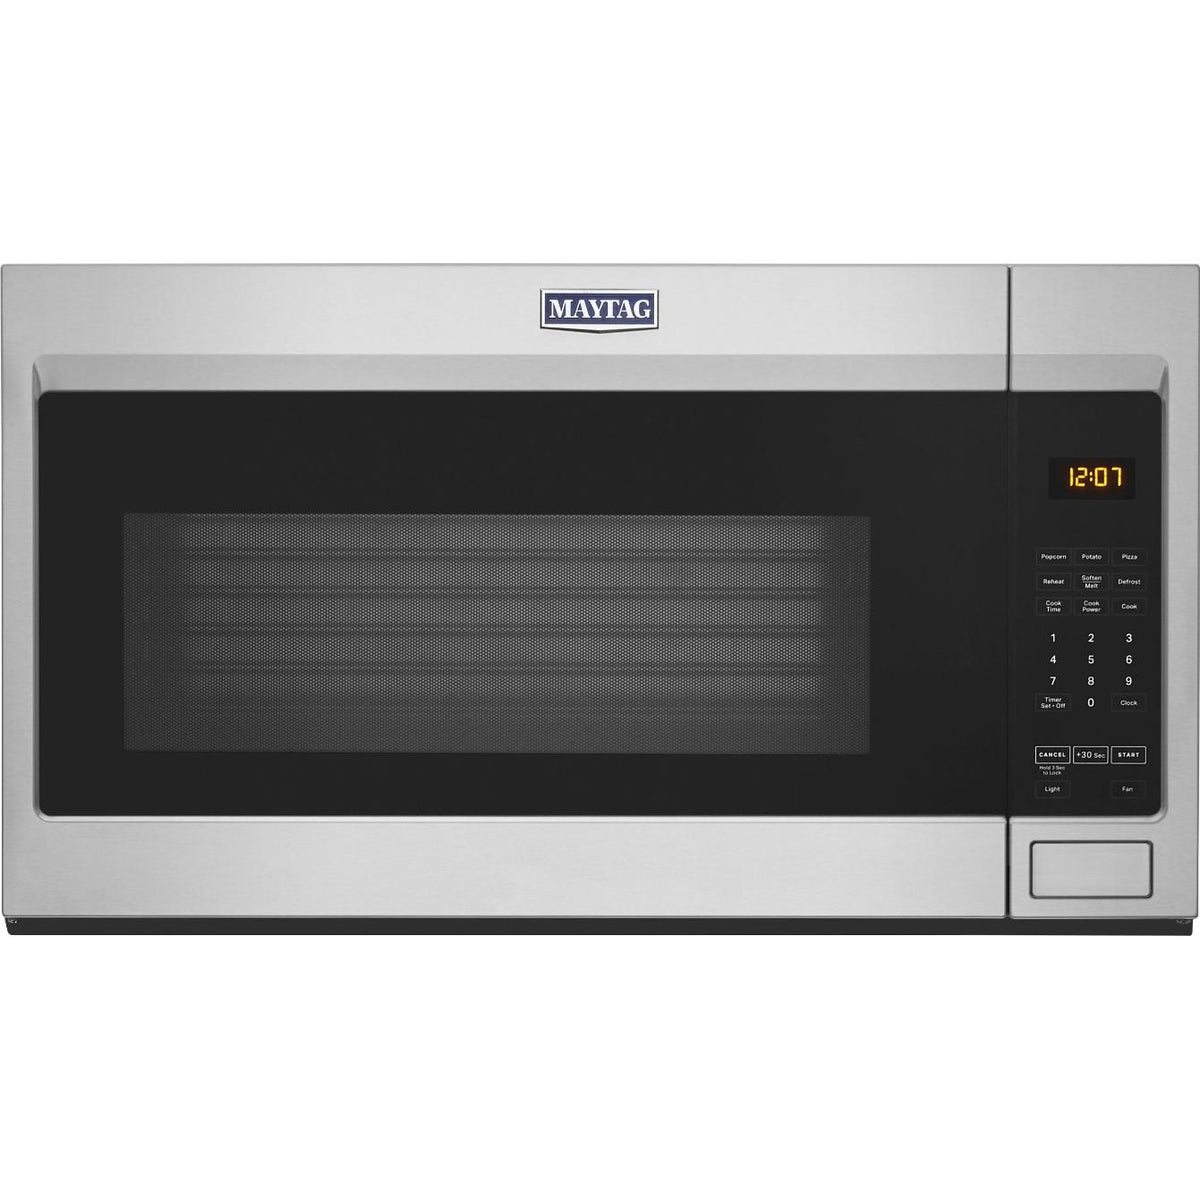 30-inch, 1.7 cu.ft. Over-the-Range Microwave Oven with Stainless Steel Interior YMMV1175JZ IMAGE 1